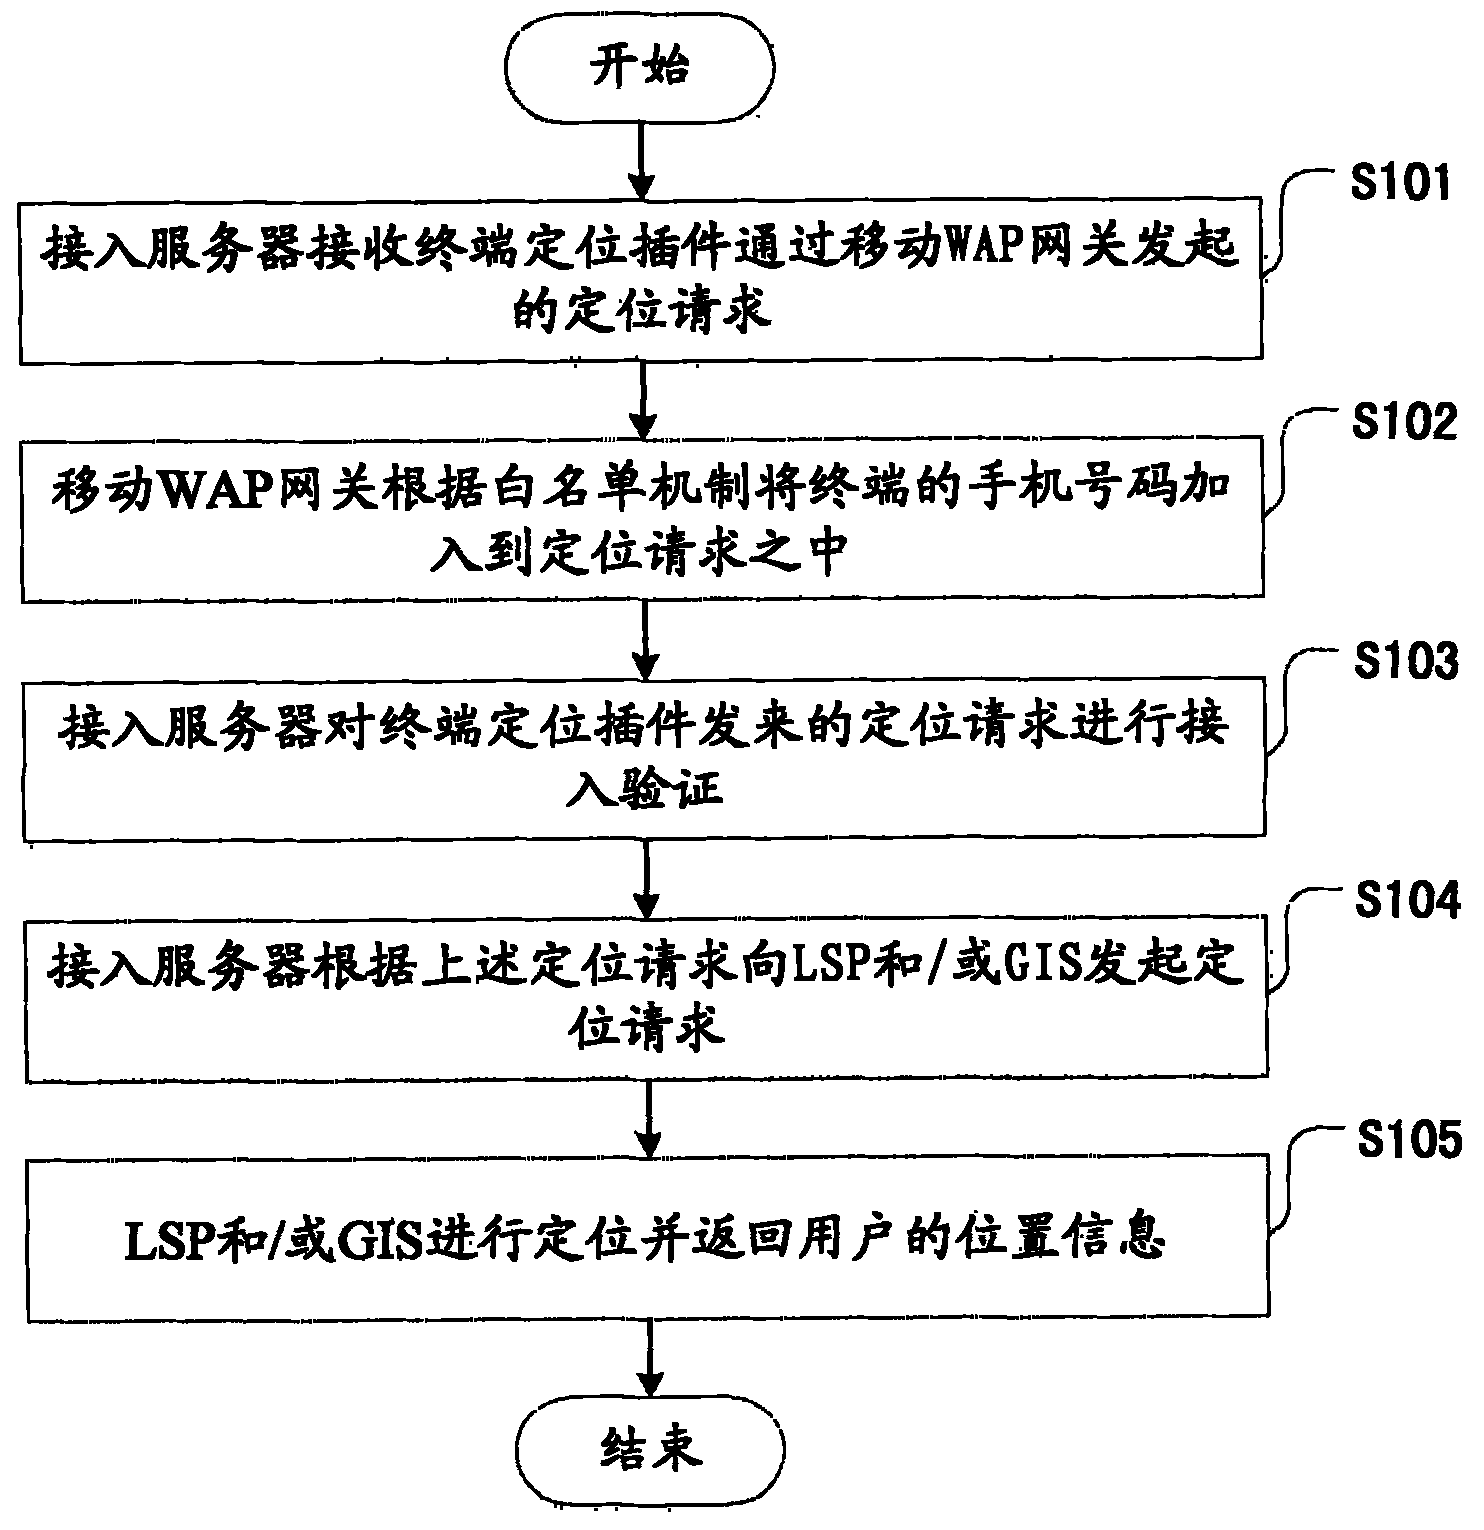 Providing method and system of mobile phone client-side location services